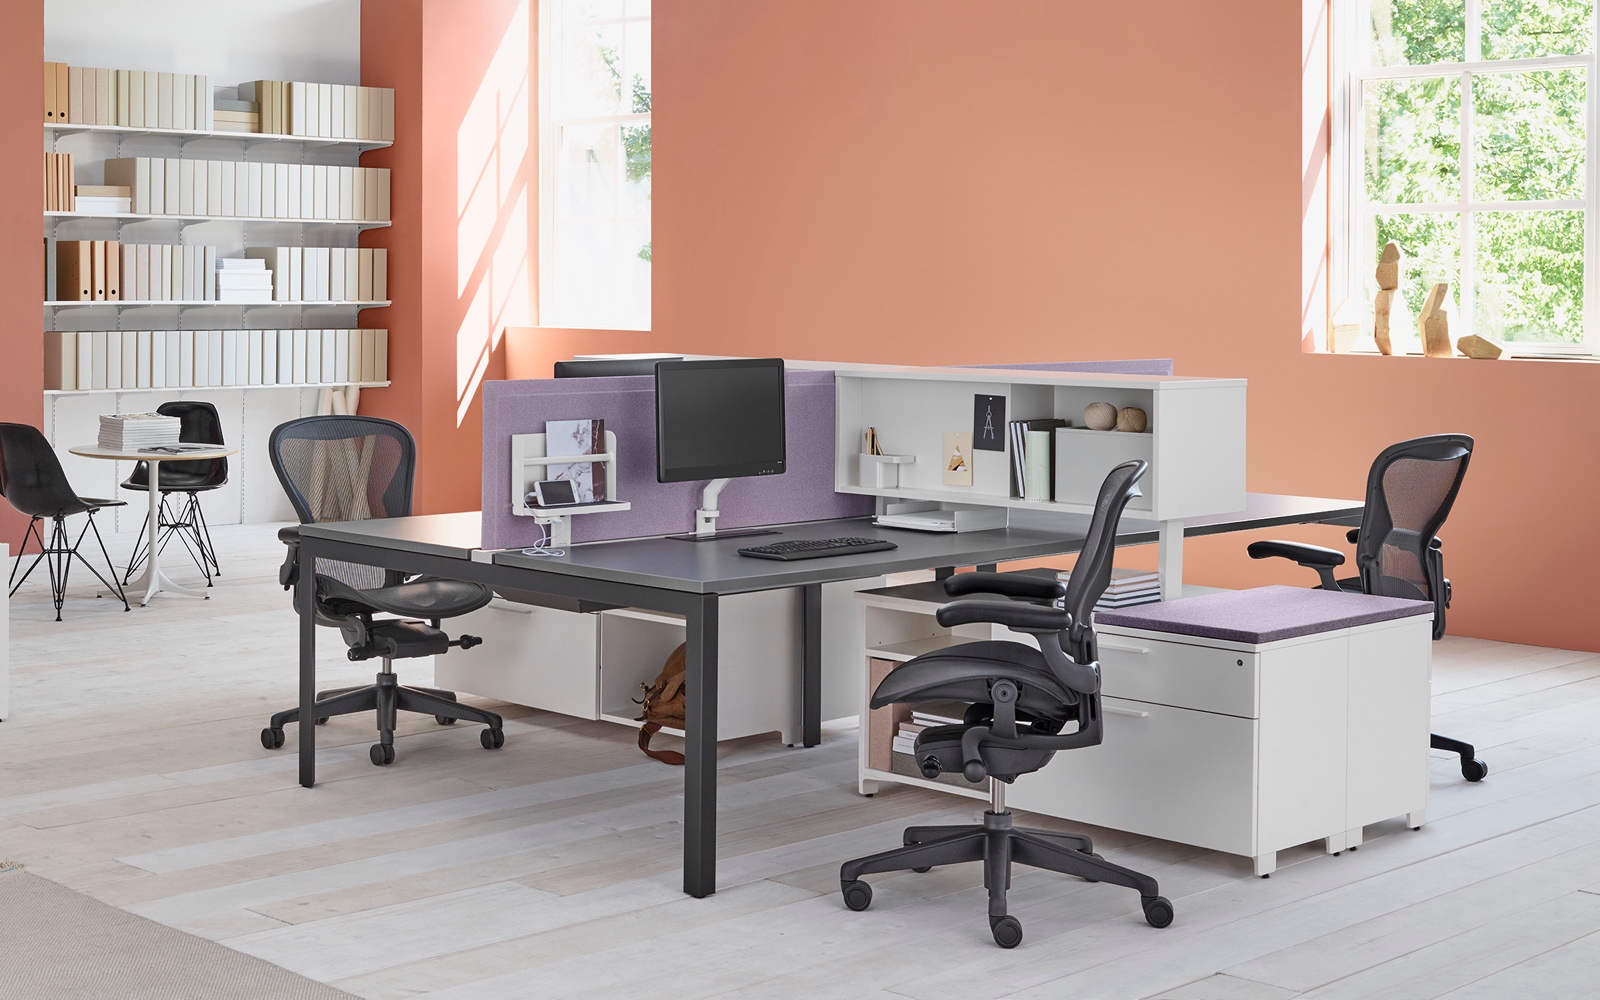 A workspace setting with two Layout Studio benches with purple fabric center privacy screens, Aeron Chairs, and Tu Storage cubbies and credenzas.